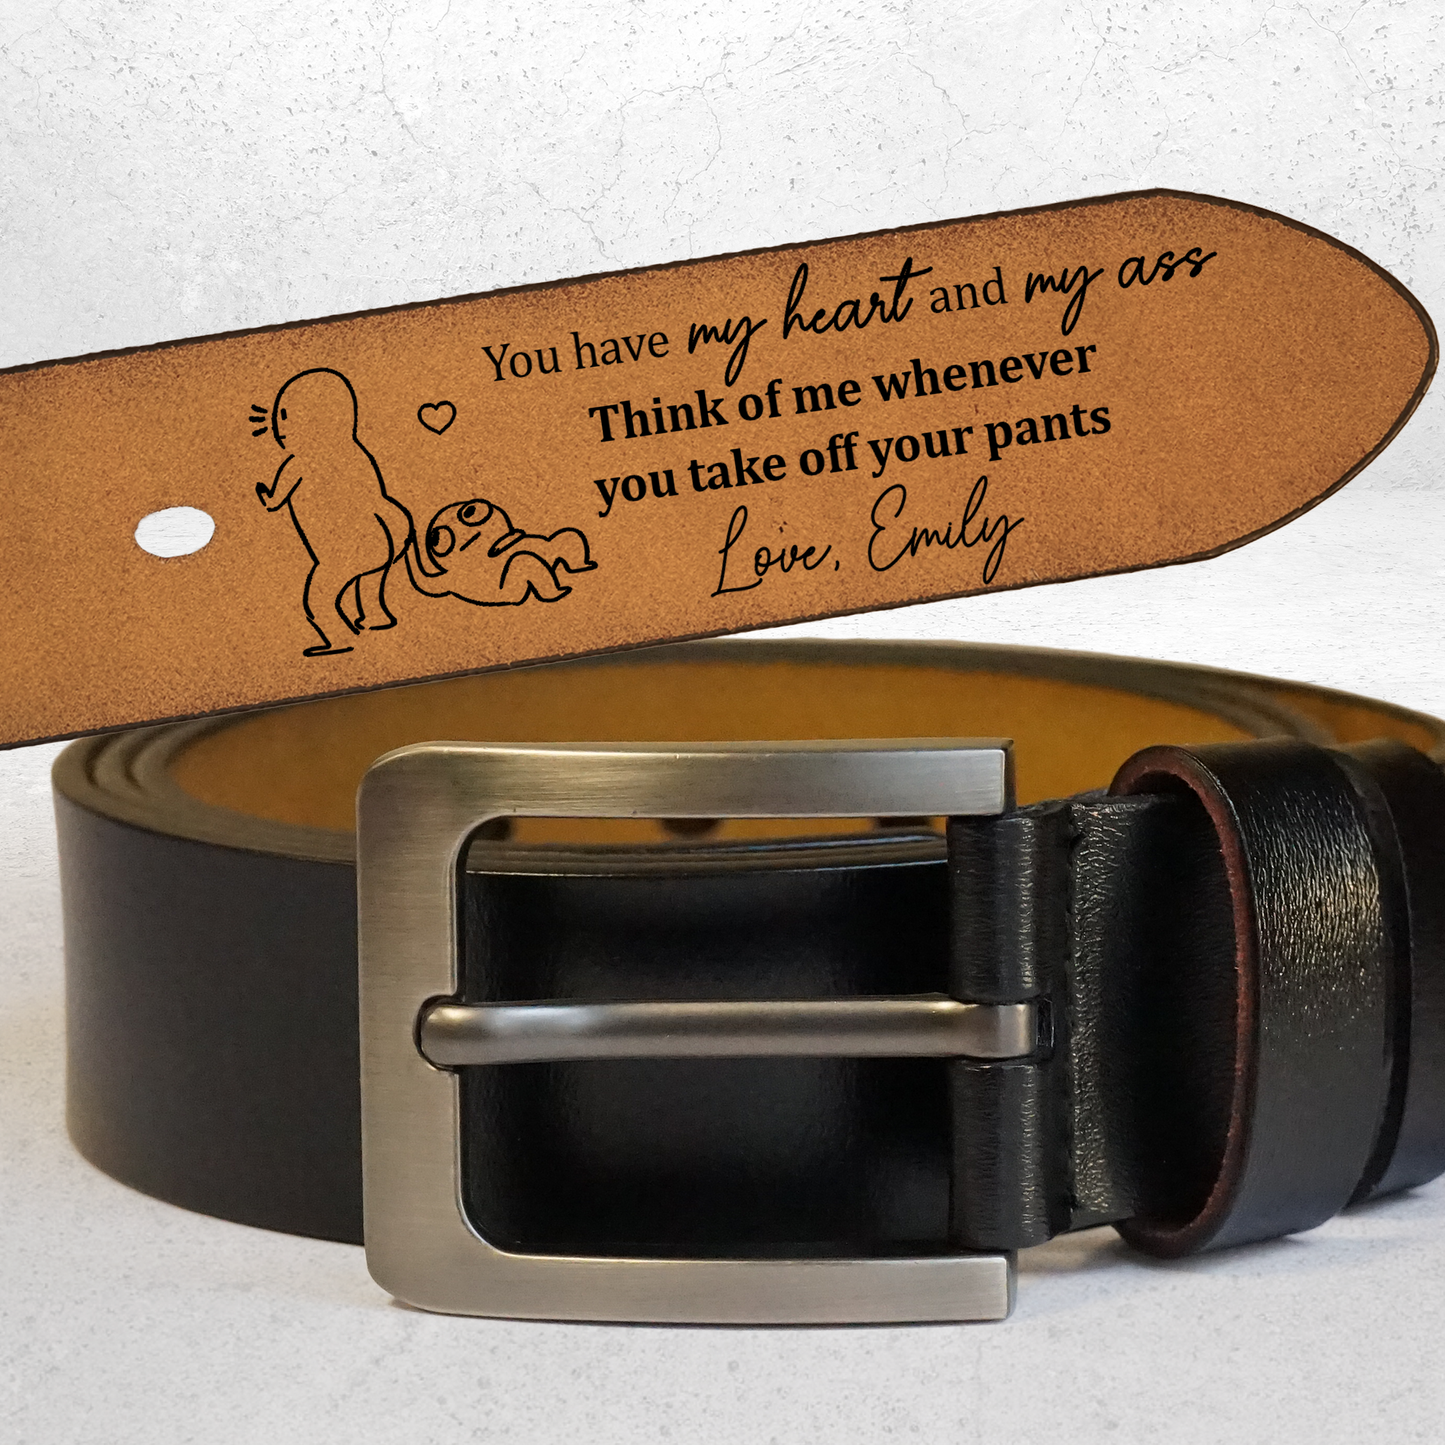 You Have My Heart & My Ass For Husband, Boyfriend - Personalized Engraved Leather Belt